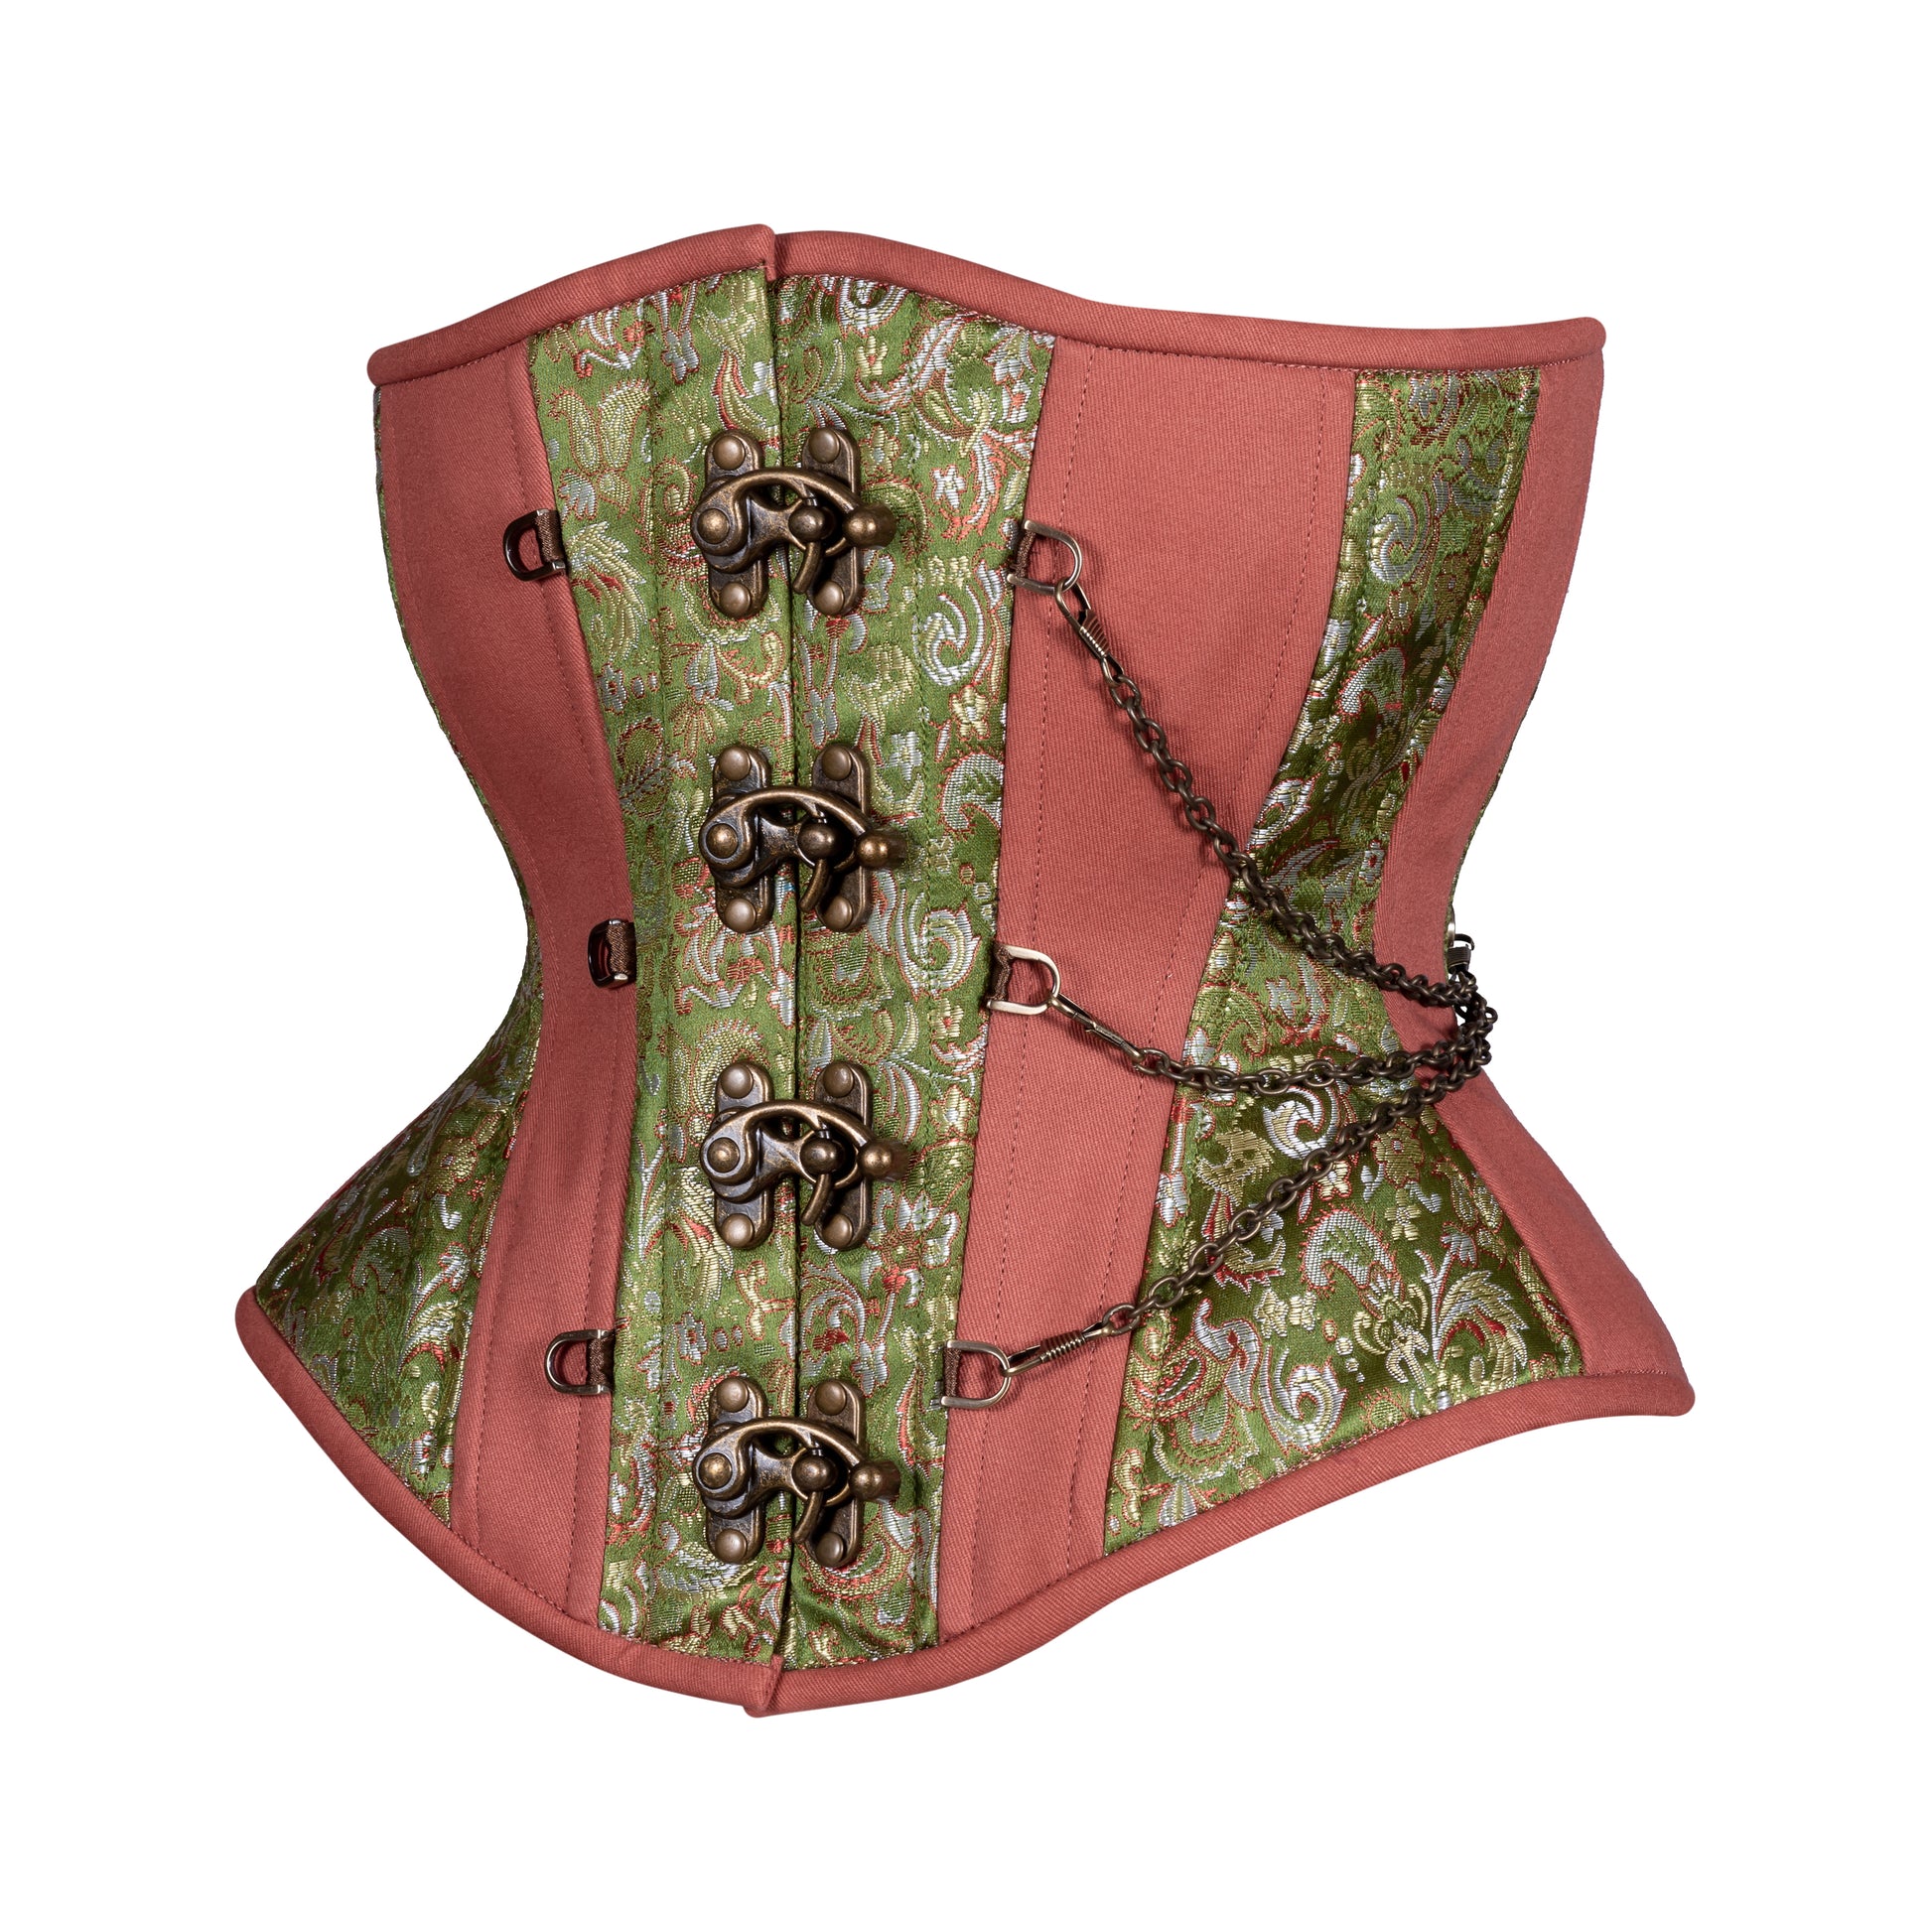 Women's Overbust Steampunk Vintage Retro Corset Bustier Shapewear - China  Corset and Waist Trainer price